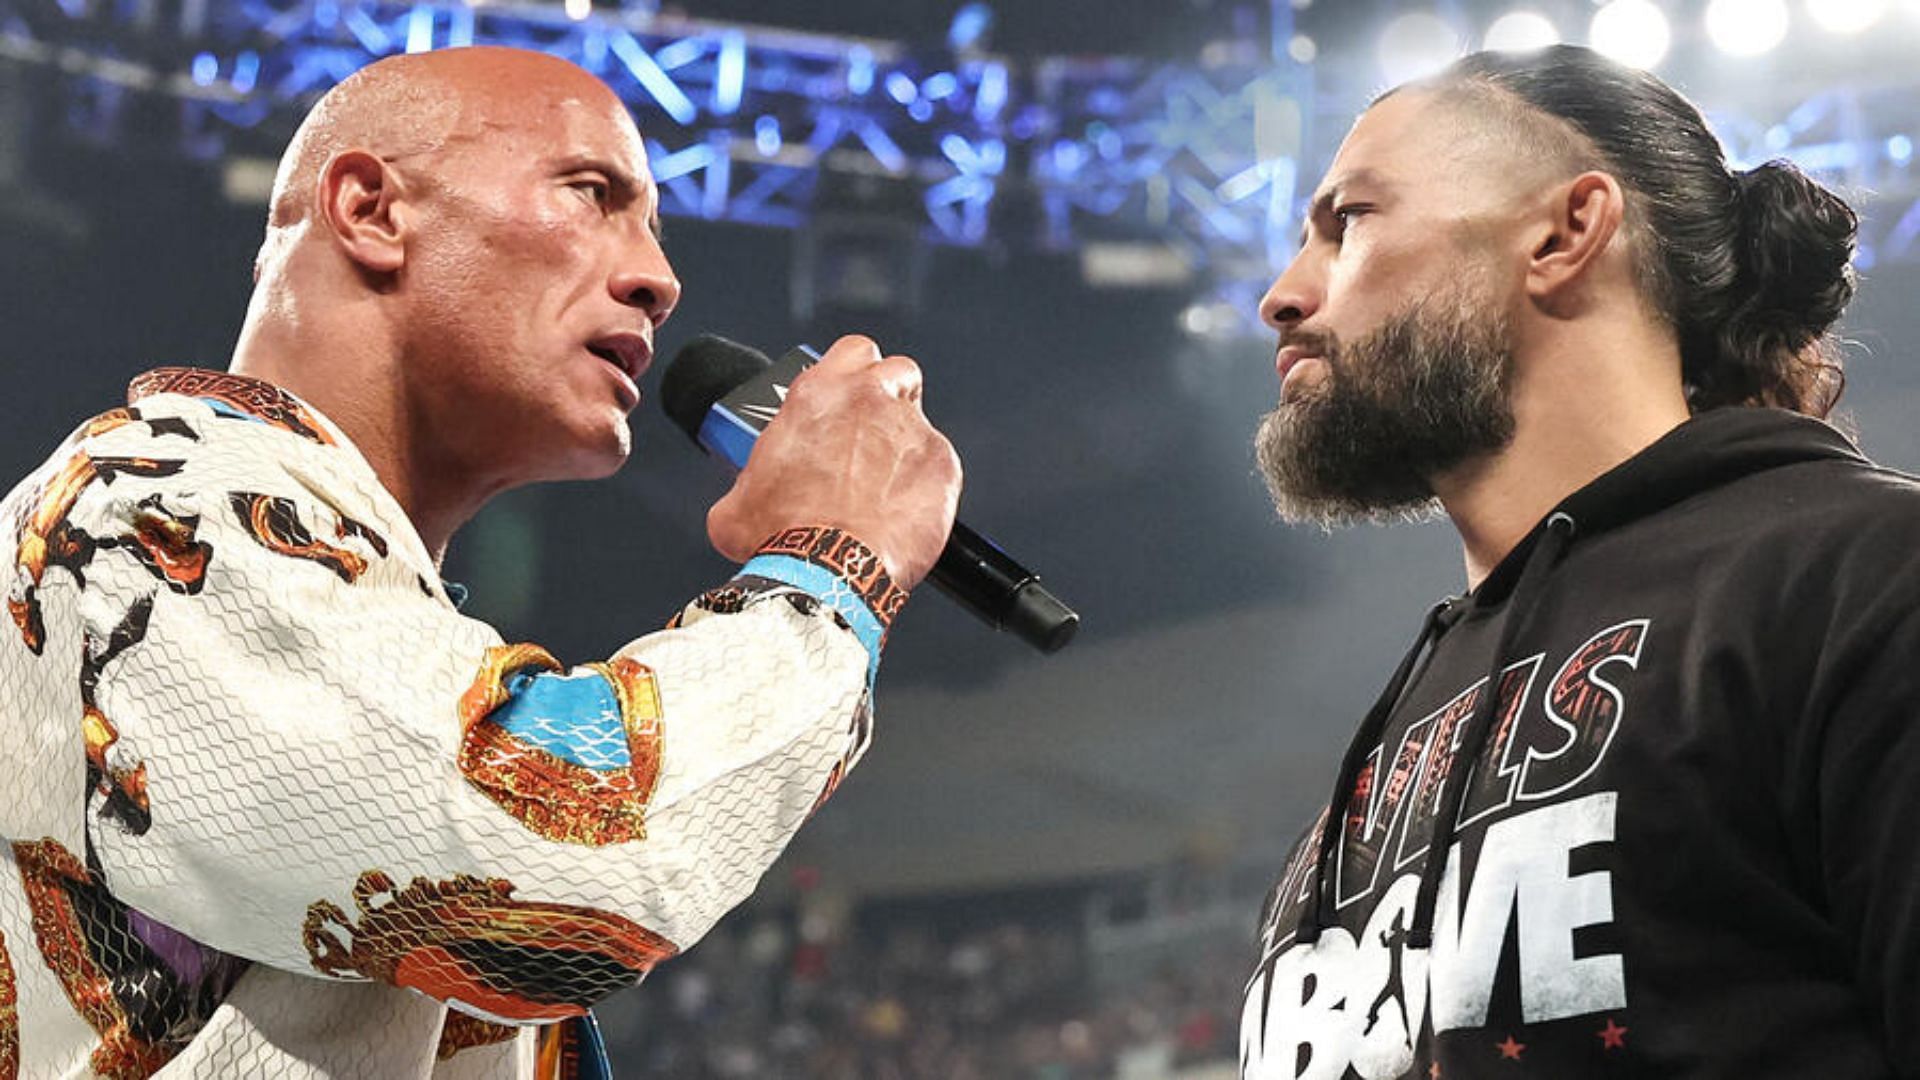 The Great One and The Tribal Chief joined forces at WrestleMania.